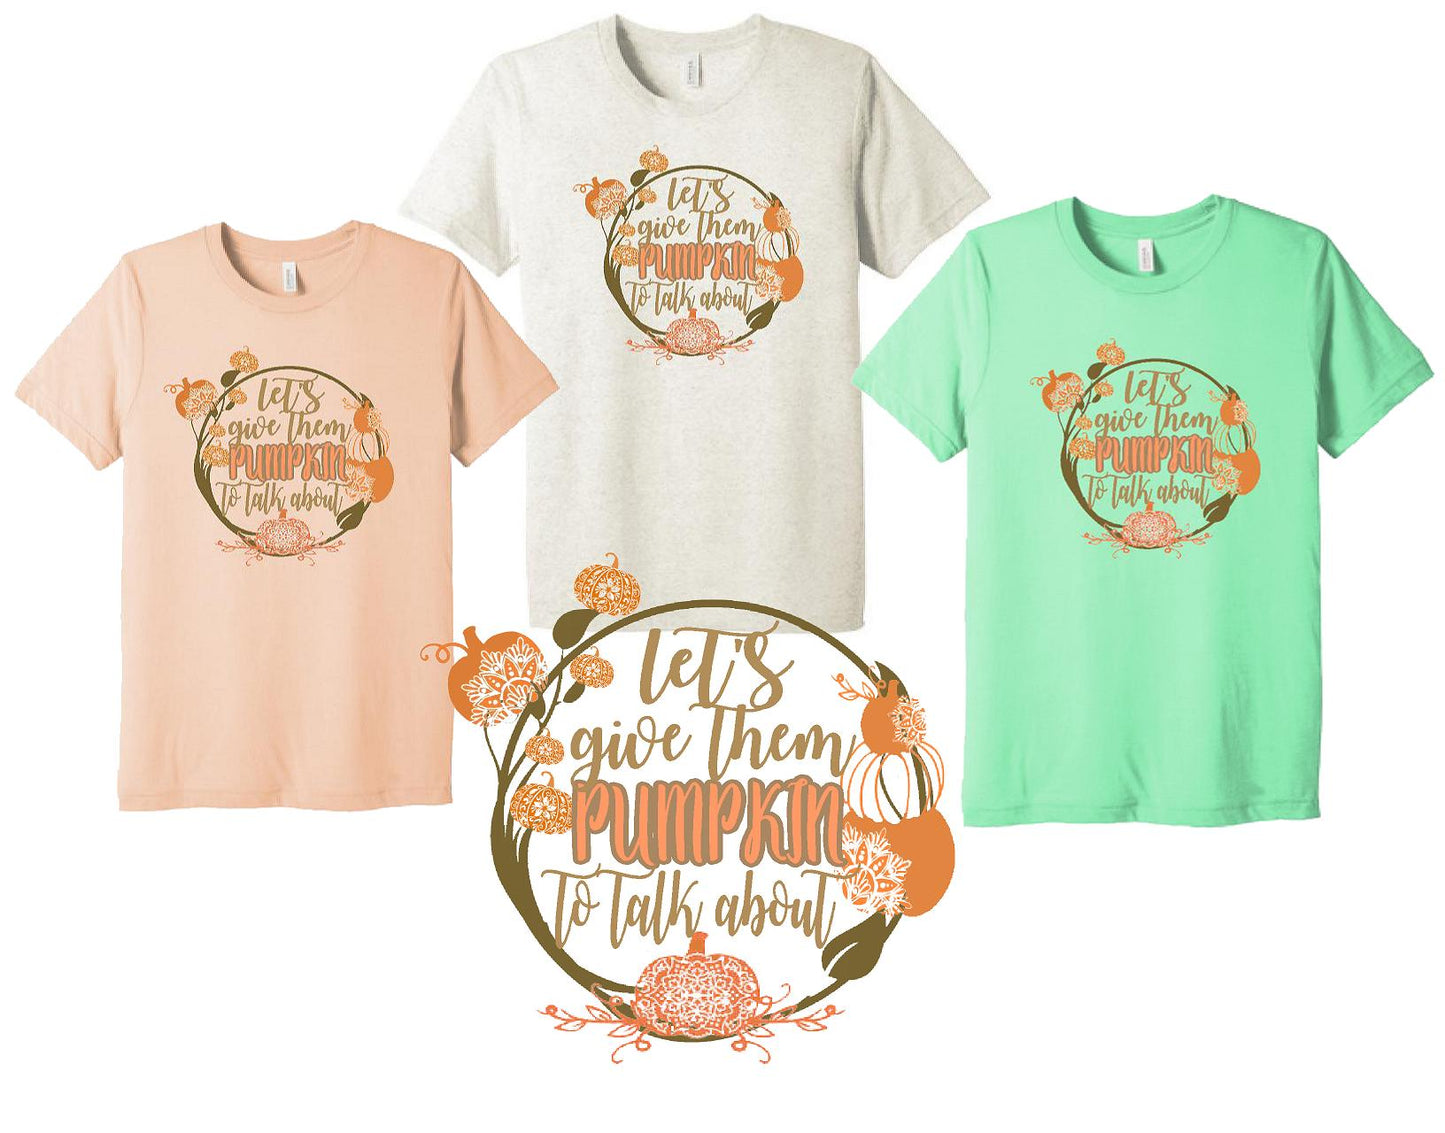 Let's Give them PUMPKIN to talk about! Short Sleeve Shirt